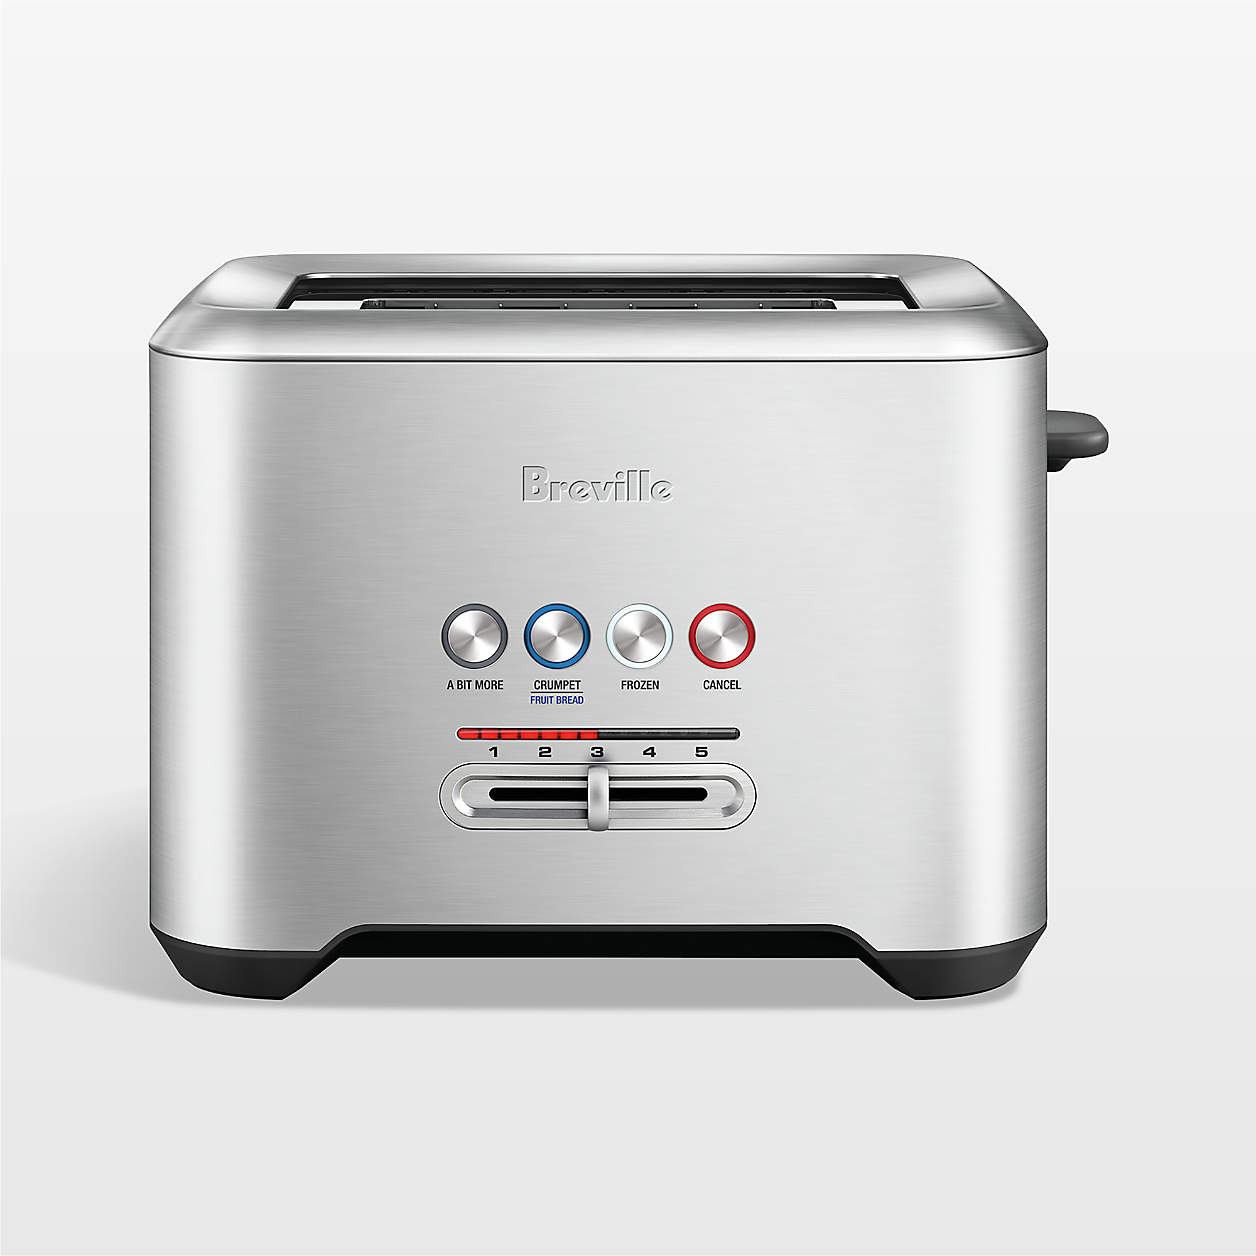 Breville ® A Bit More ® 2-Slice Toaster in Brushed Stainless Steel